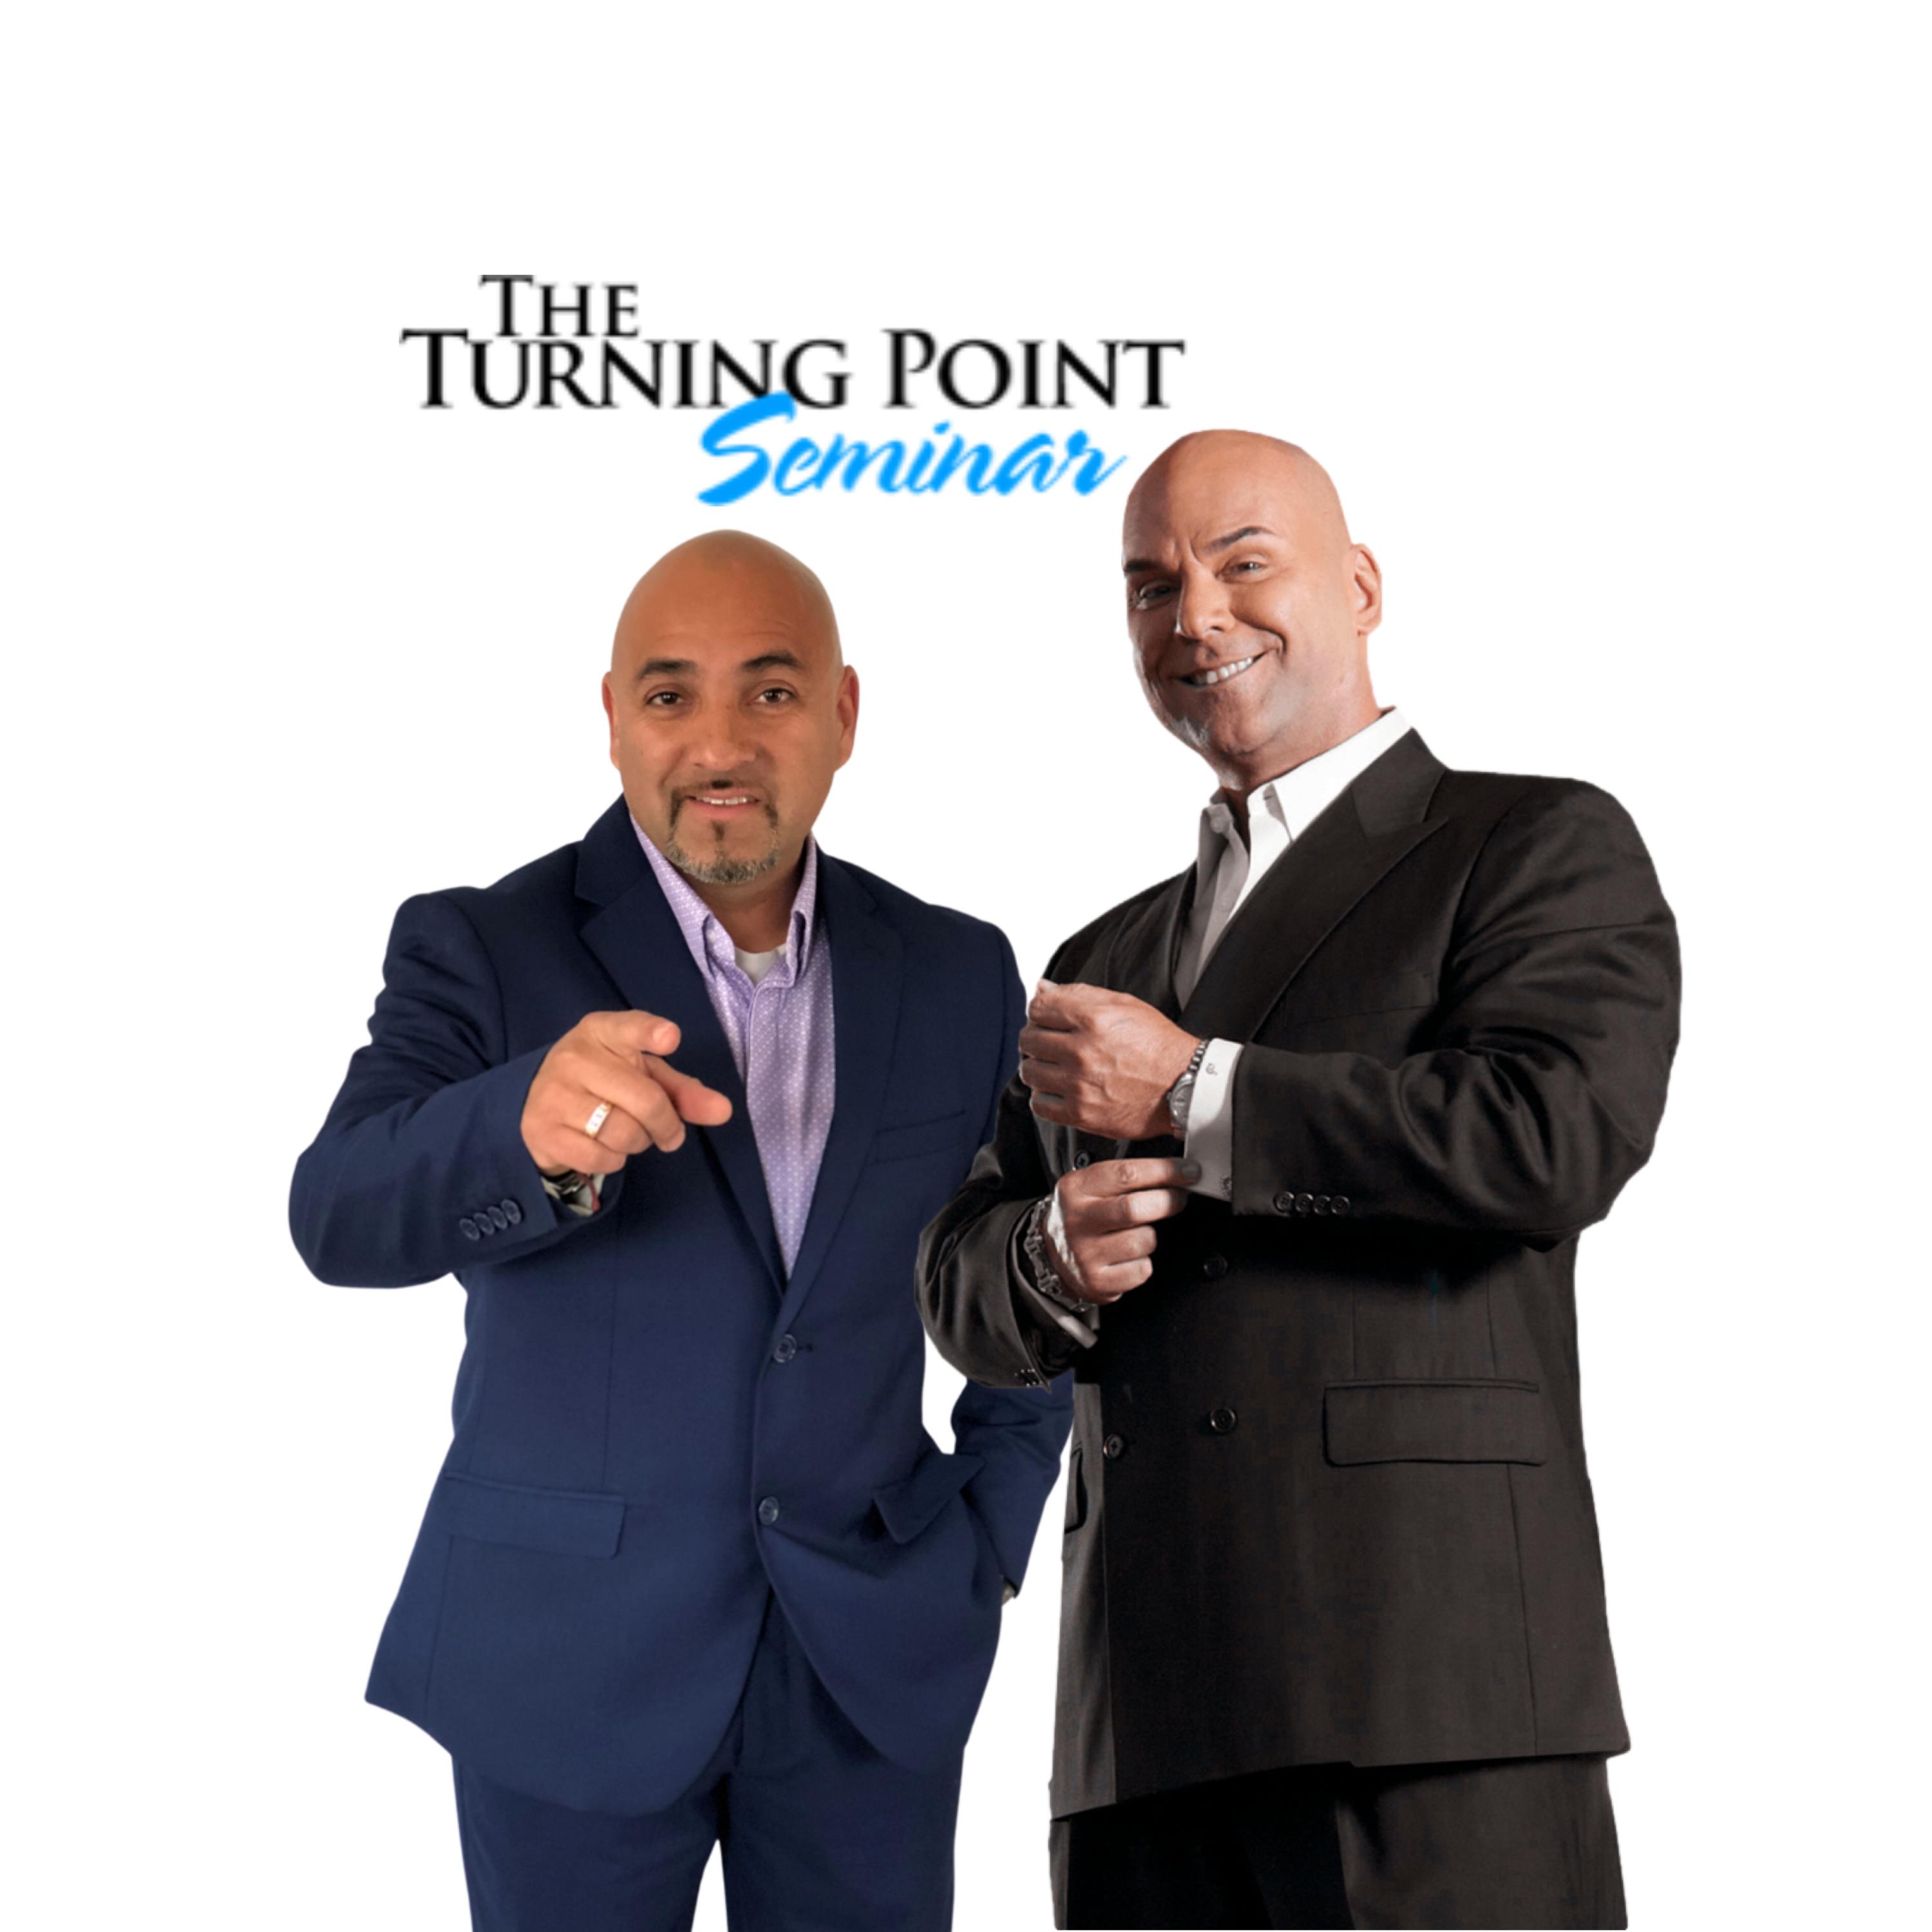 Real Estate Professionals Invited to Experience Transformation at the Turning Point™ Seminar in Las Vegas